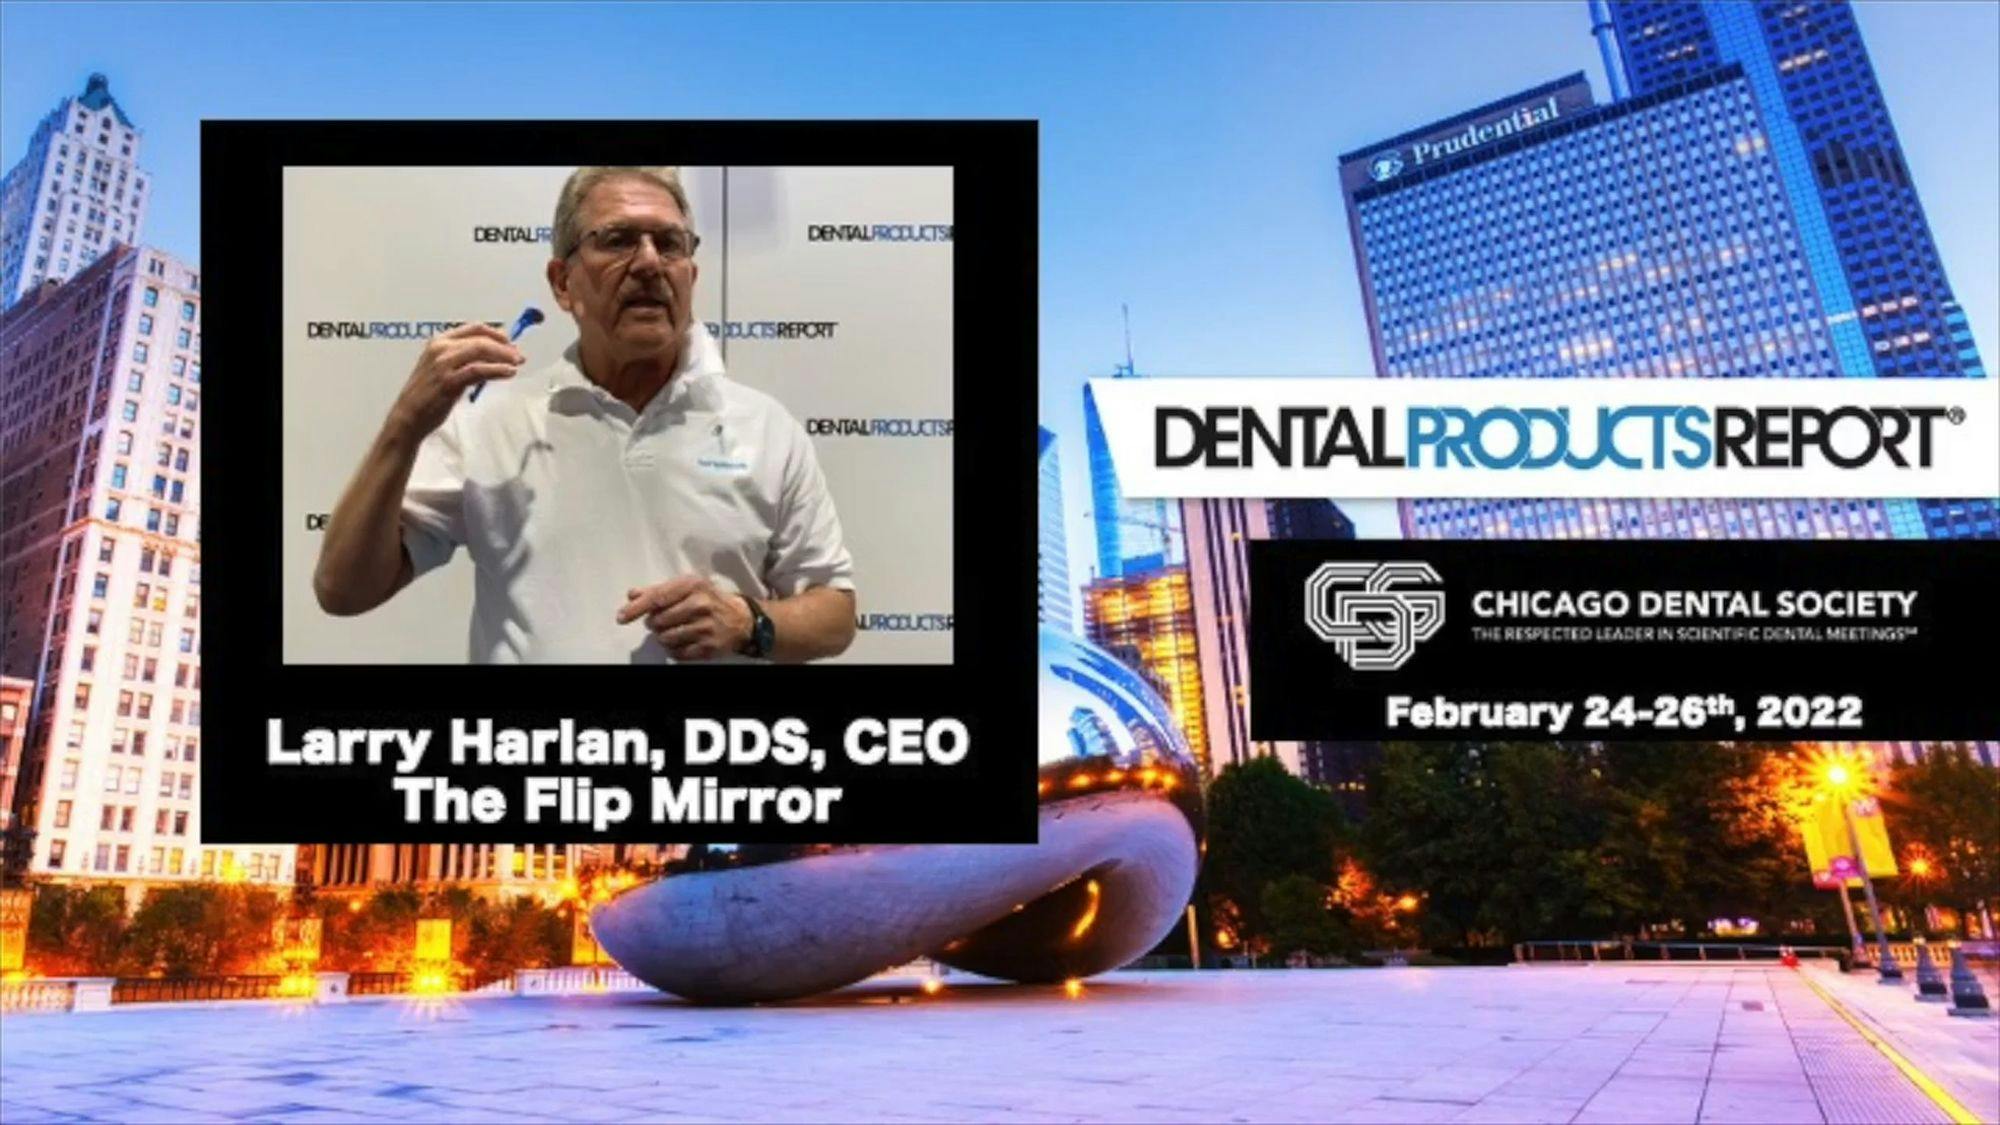 2022 Chicago Dental Society Midwinter Meeting, Interview with theFlipMirror CEO Larry Harlan, DDS